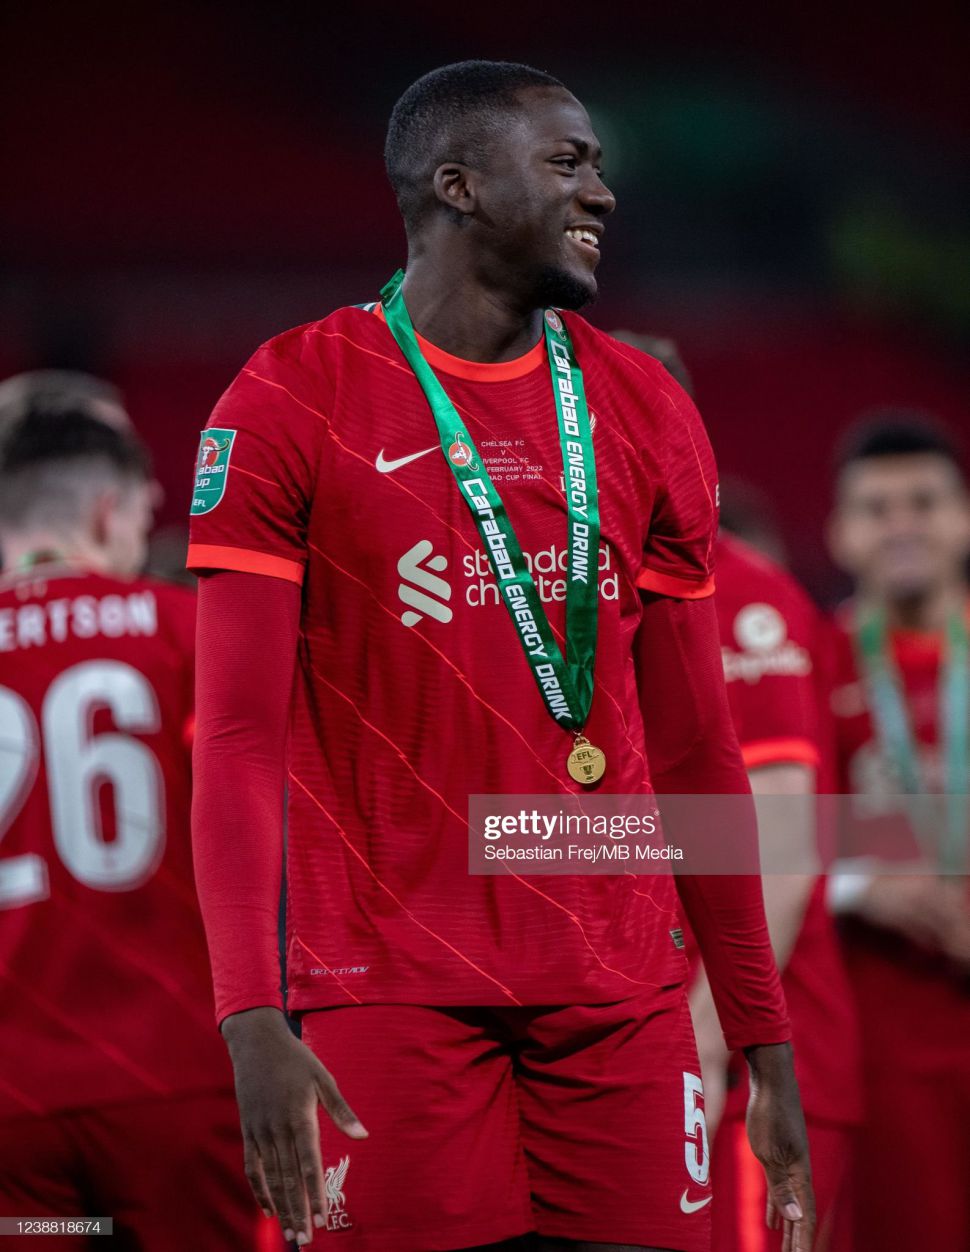 2021-2022 Carabao League Cup Liverpool champion winner medal gold